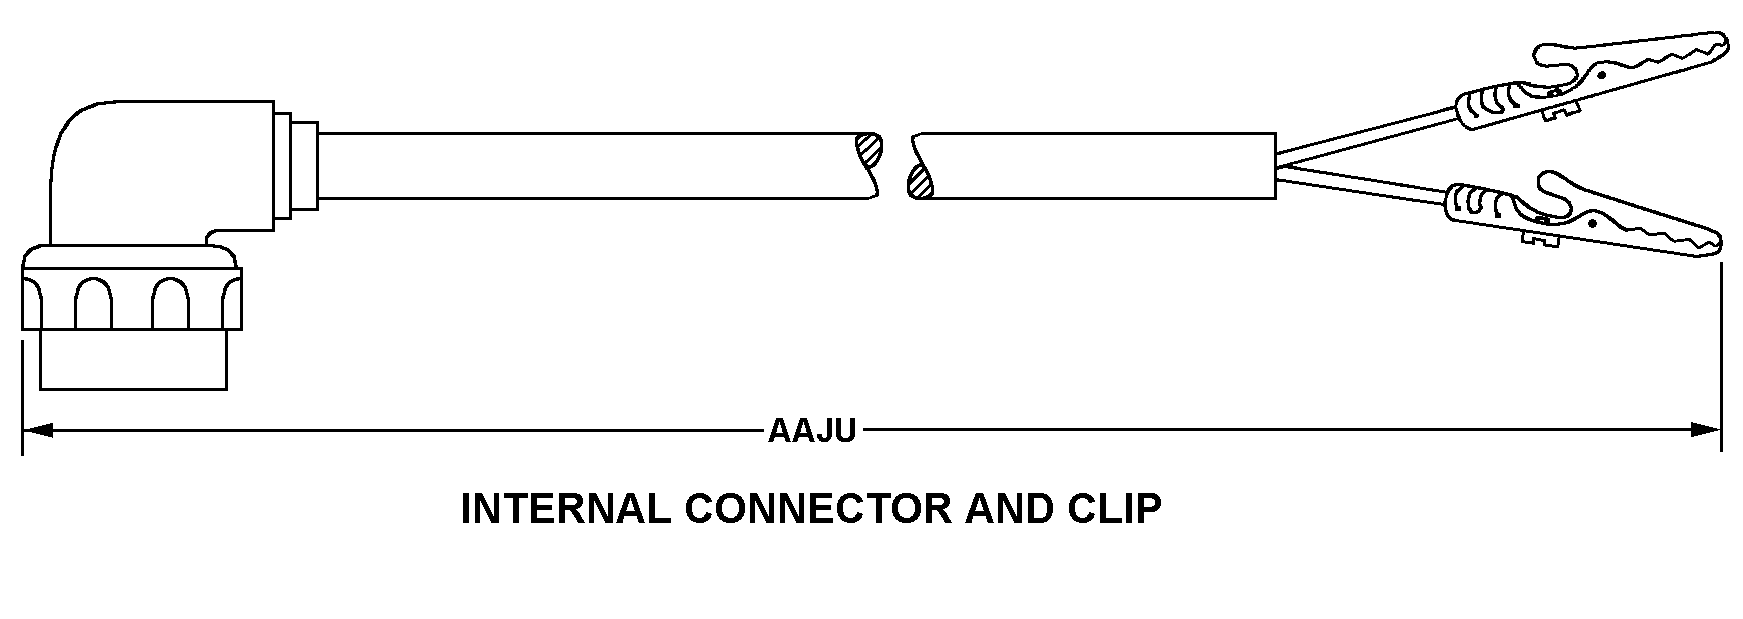 INTERNAL CONNECTOR AND CLIP style nsn 6625-00-193-7128